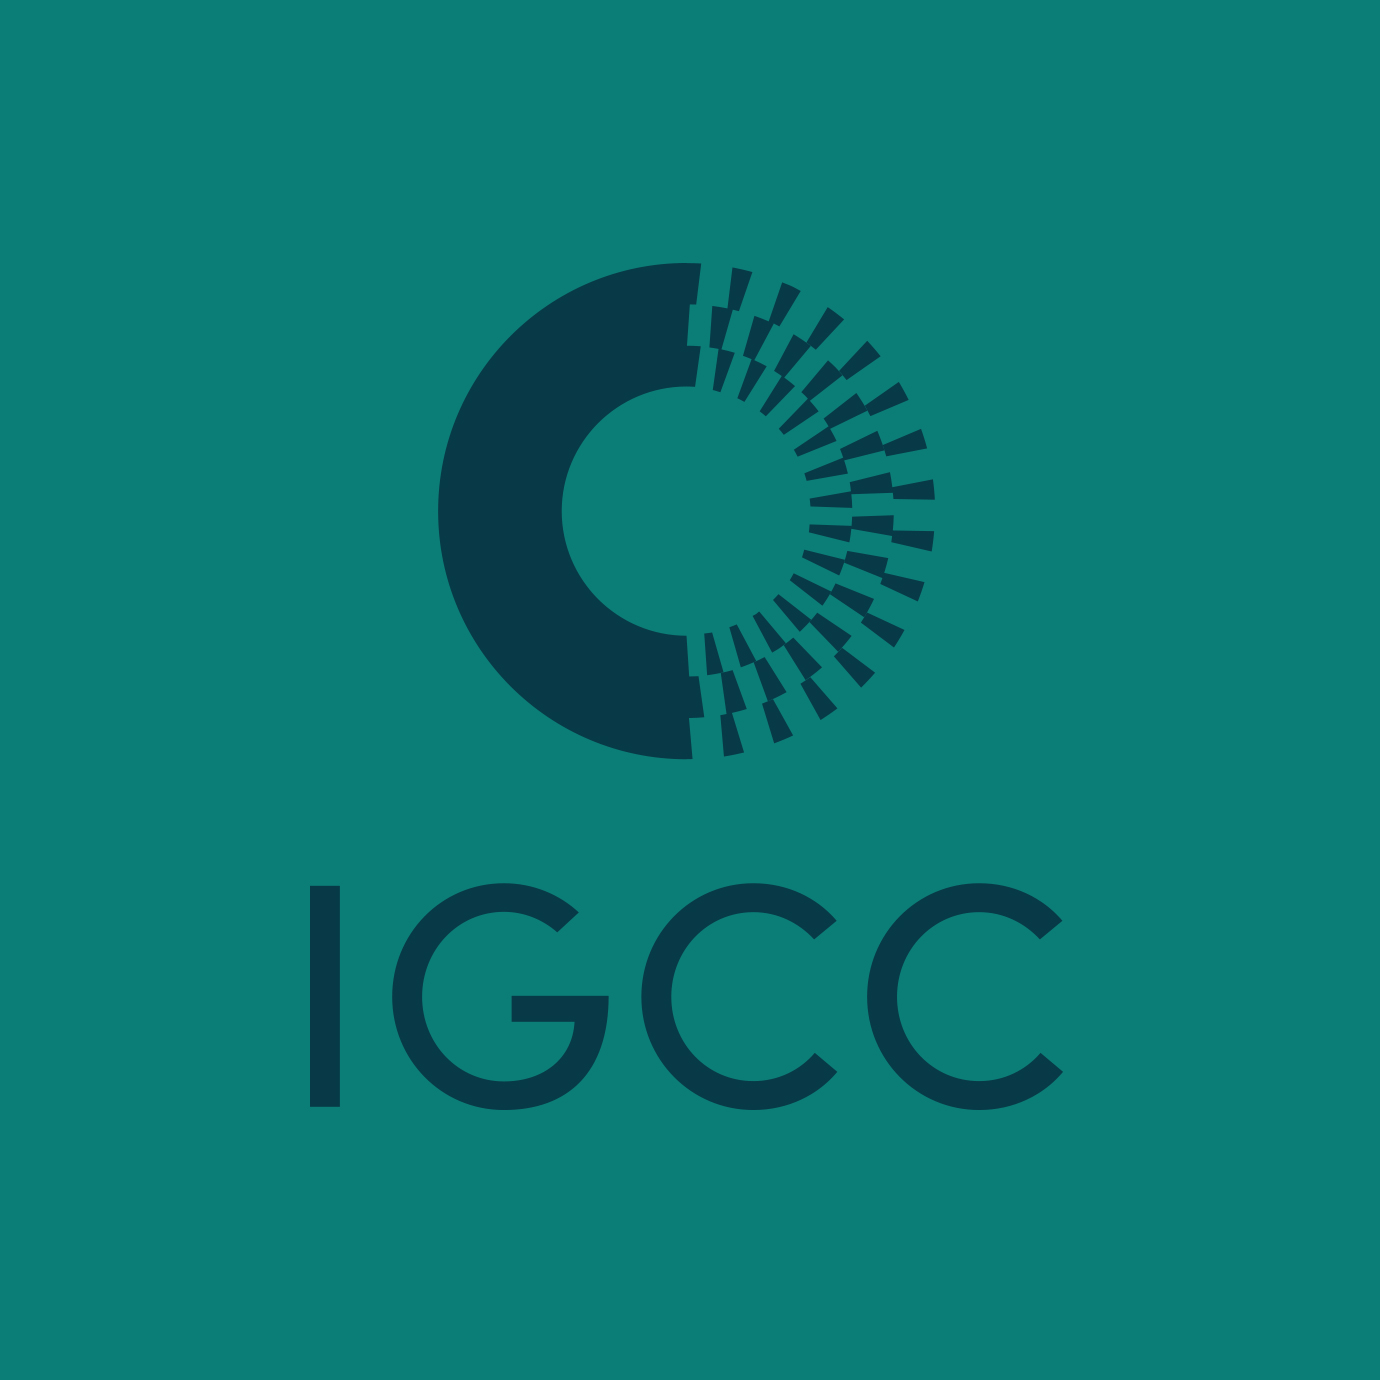 IGCC stacked logo, teal on green background